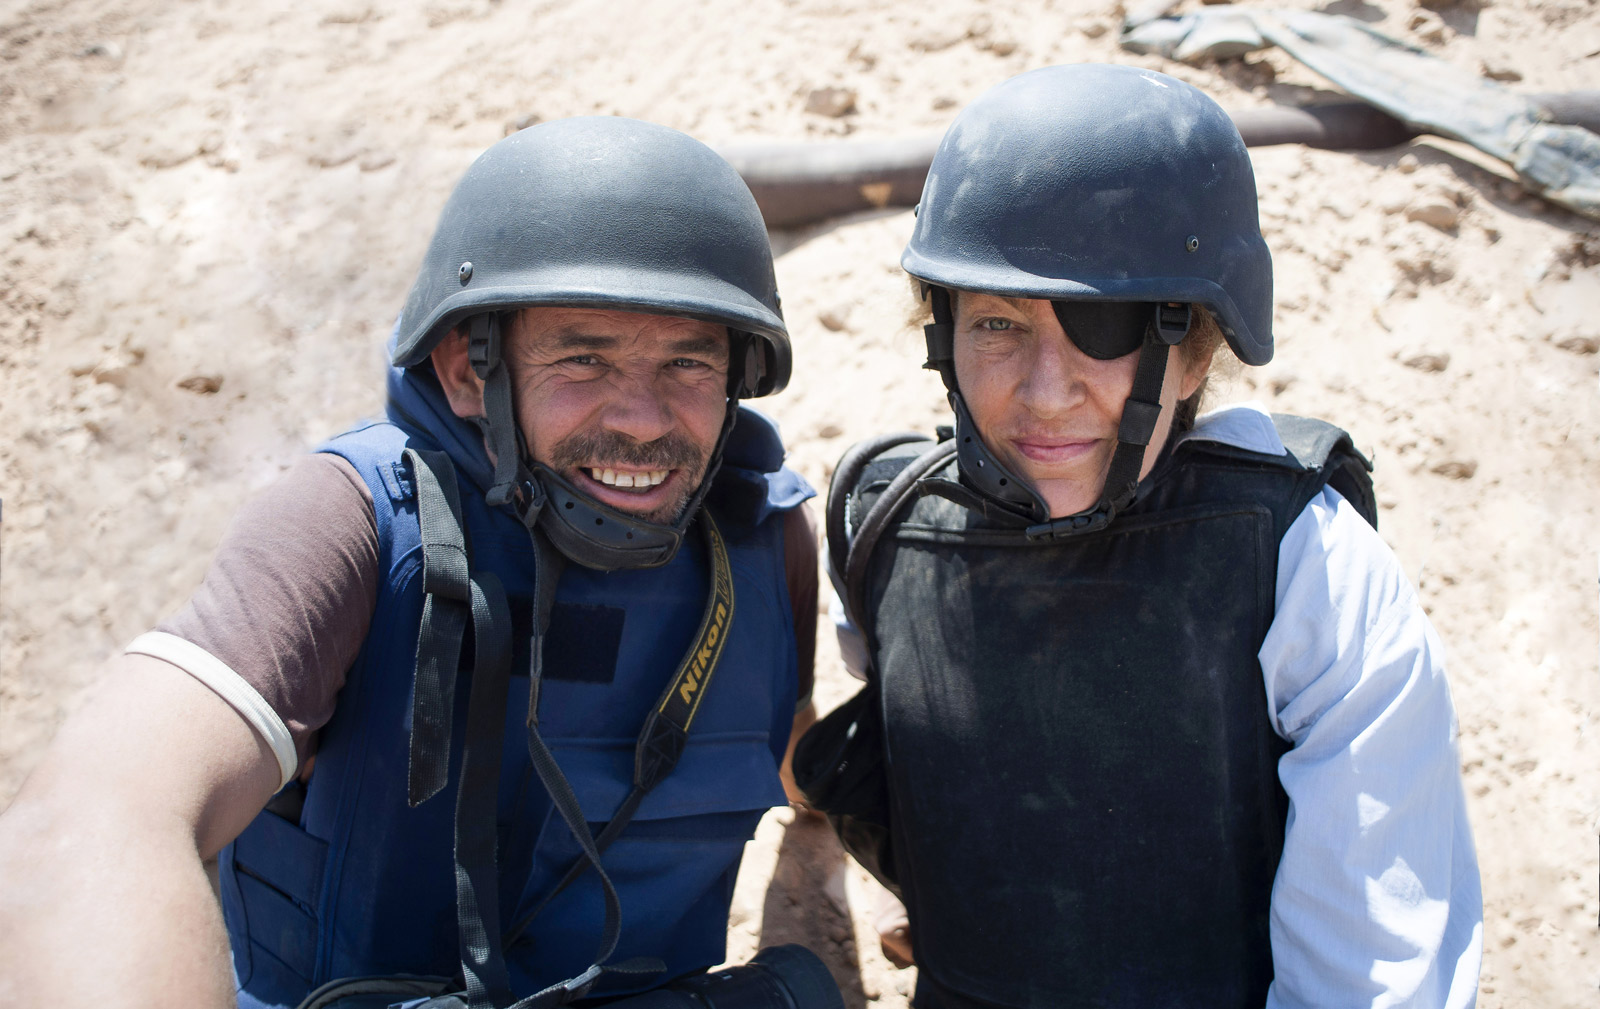 The journalist Paul Conroy and Marie Colvin, Syria, 2012